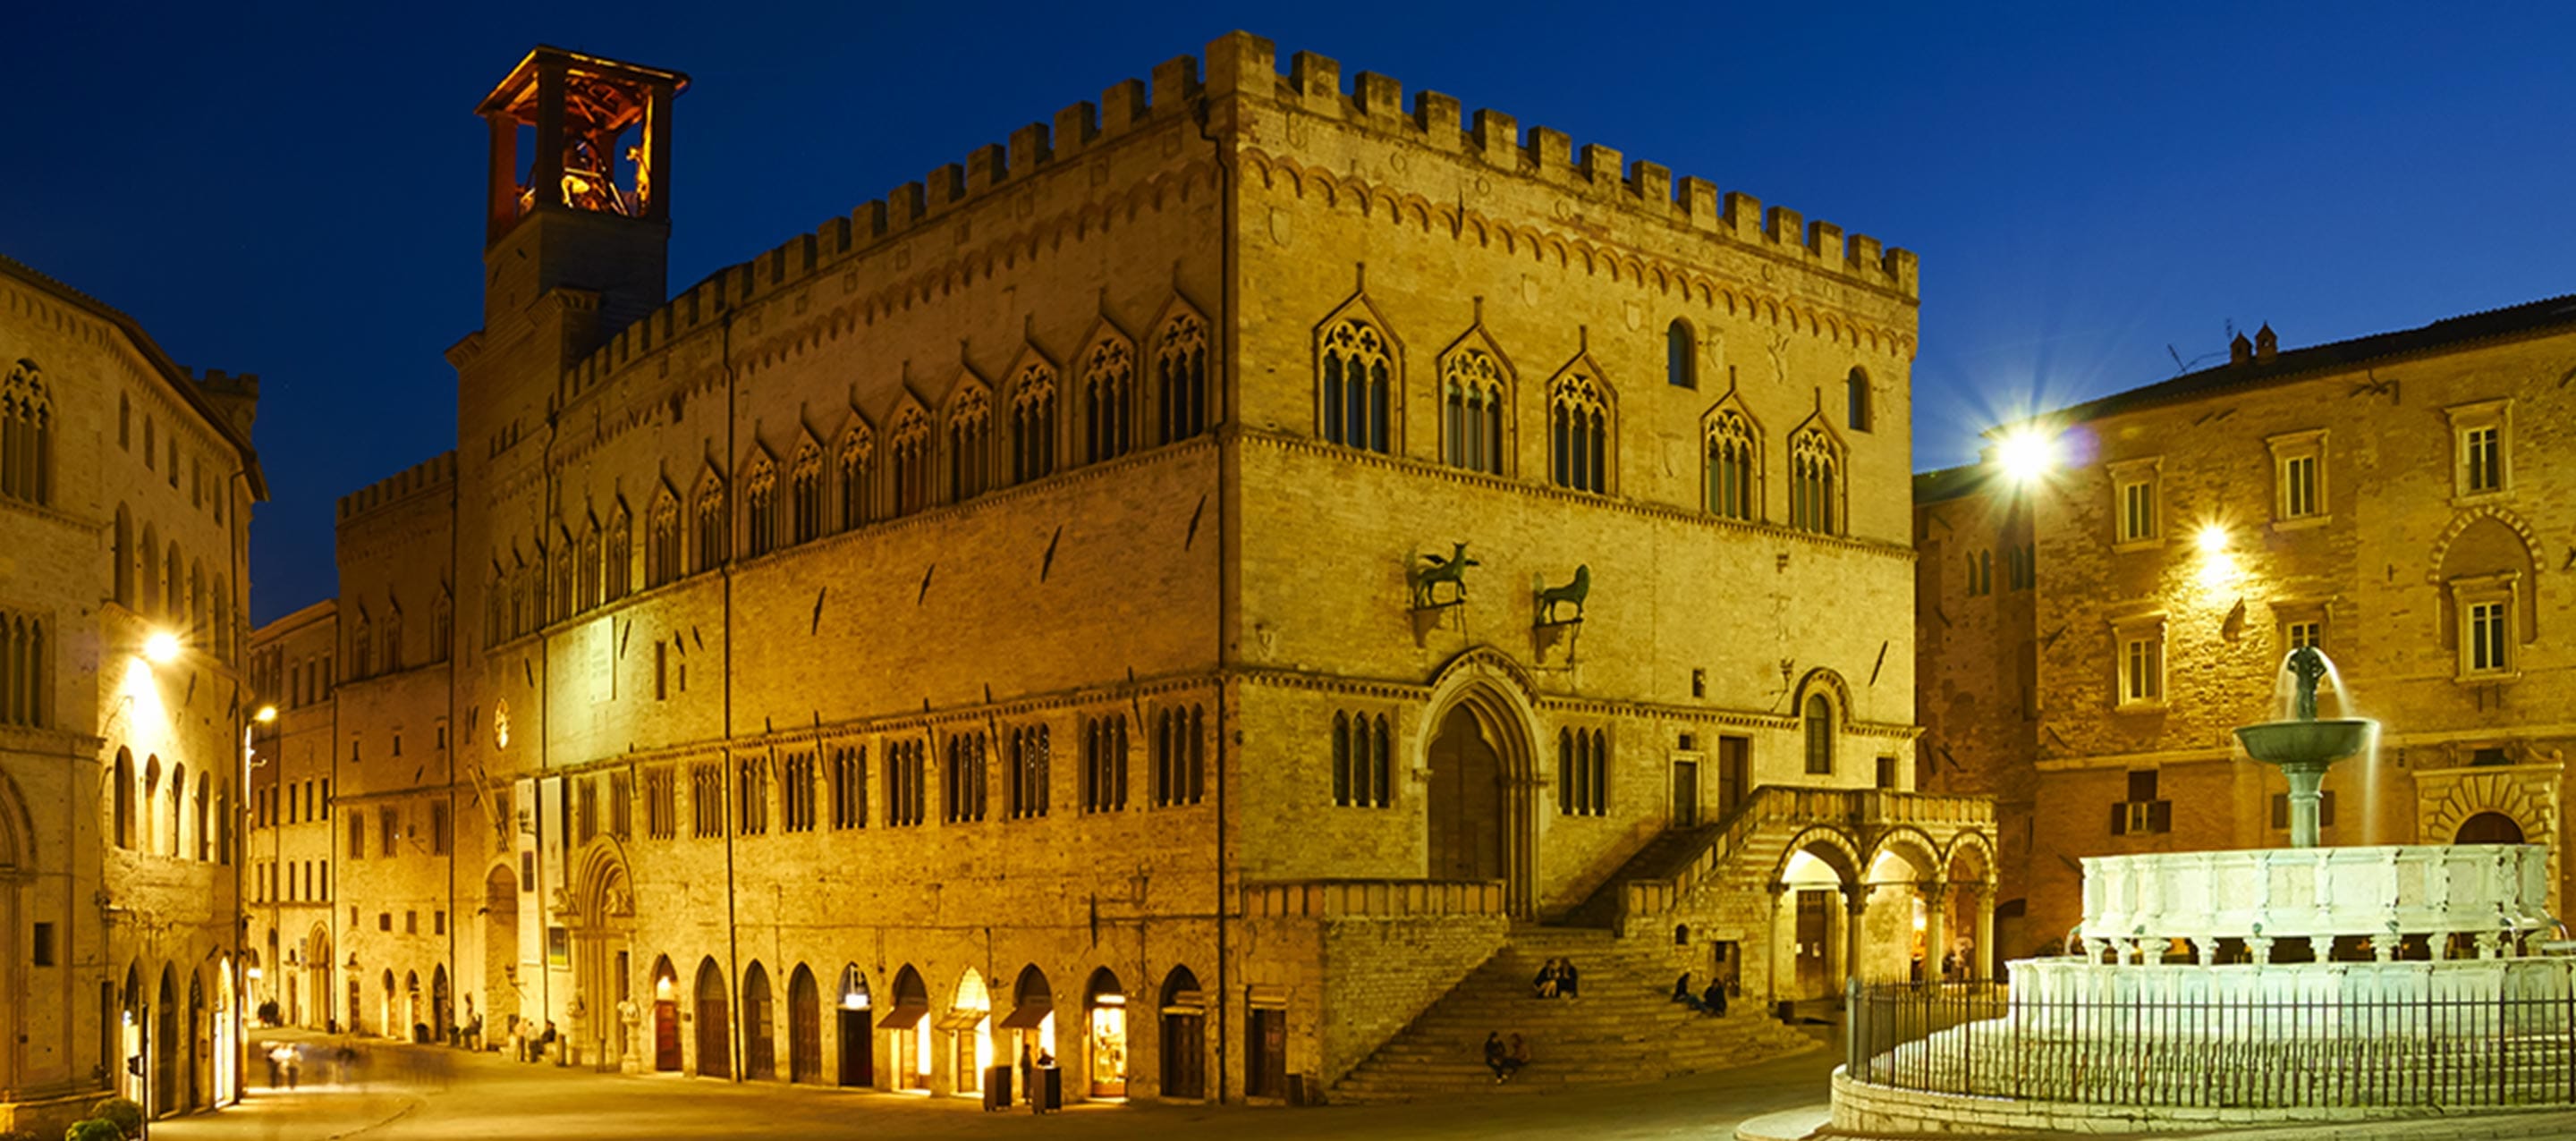 Perugia, recommended by Lonely Planet and Tripadvisor